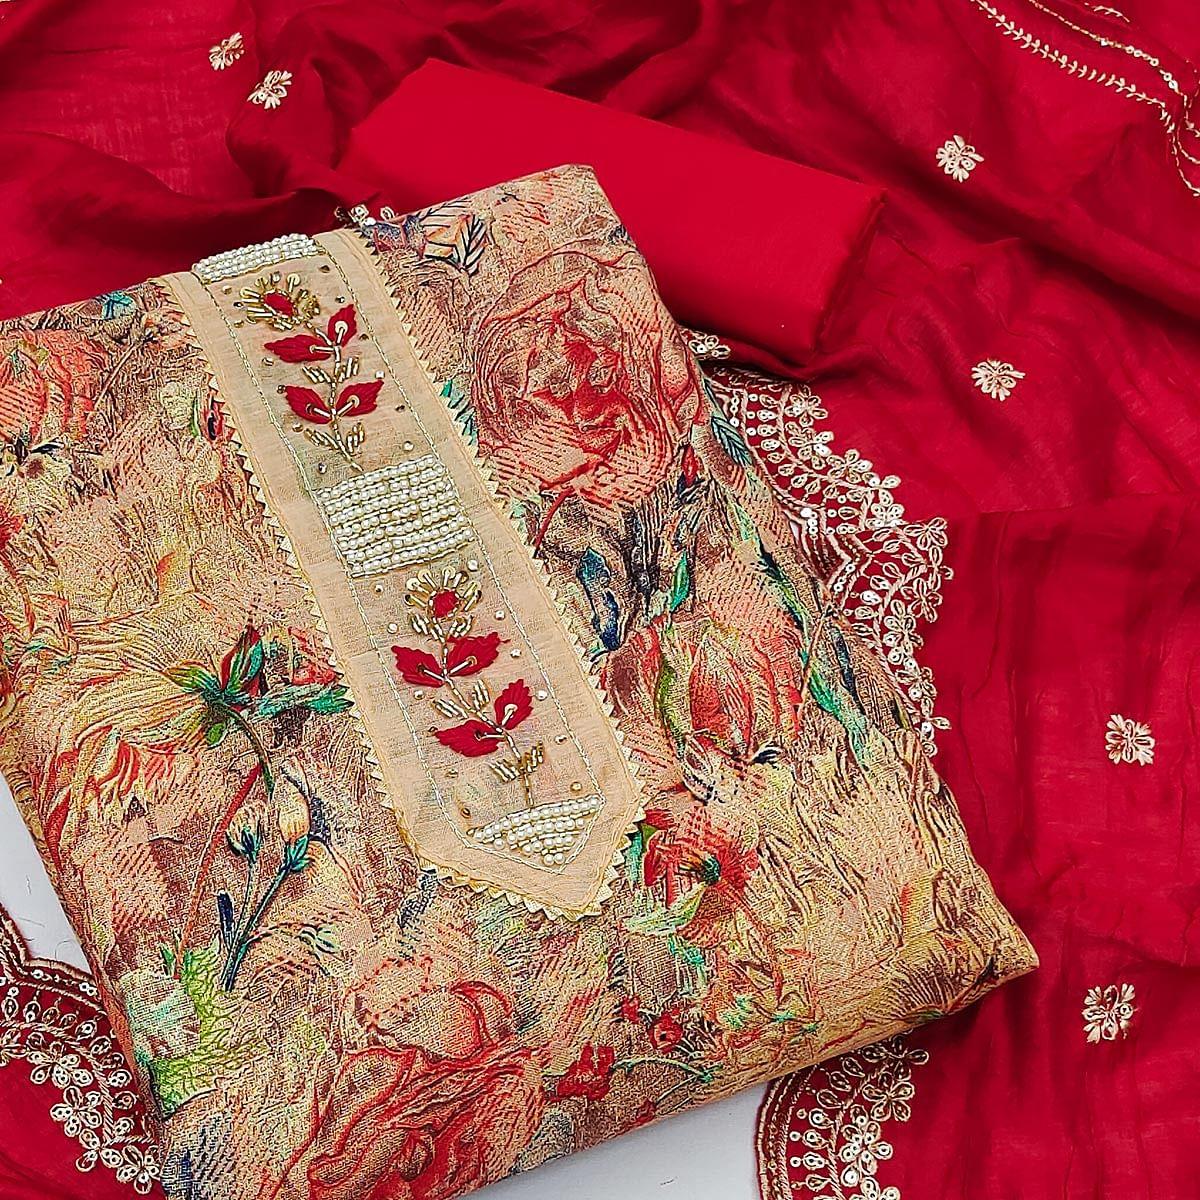 Red Festive Wear Floral Printed With Embellsihed Cotton Dress Material - Peachmode